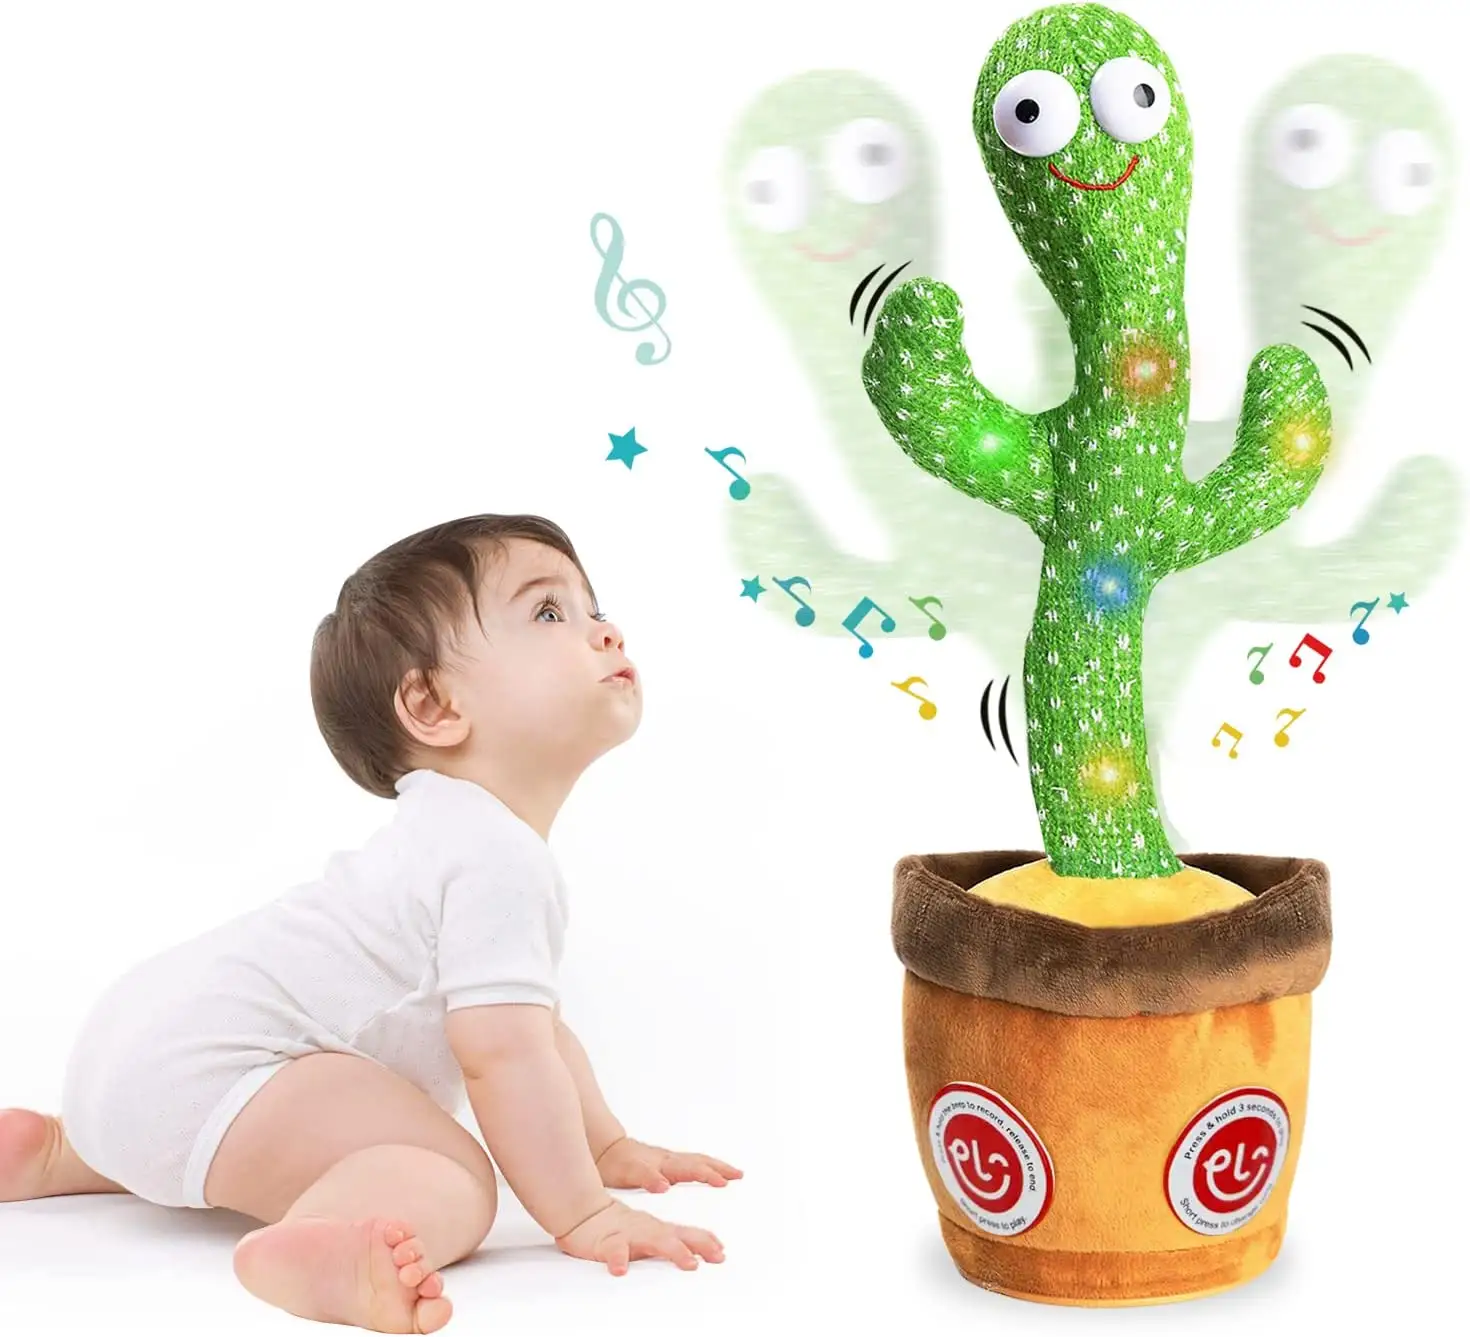 Dance Talking Cactus Toy Singing Dancing Mimicking Toy for Babies Repeating Cactus Repeats What You Say Plush Toys